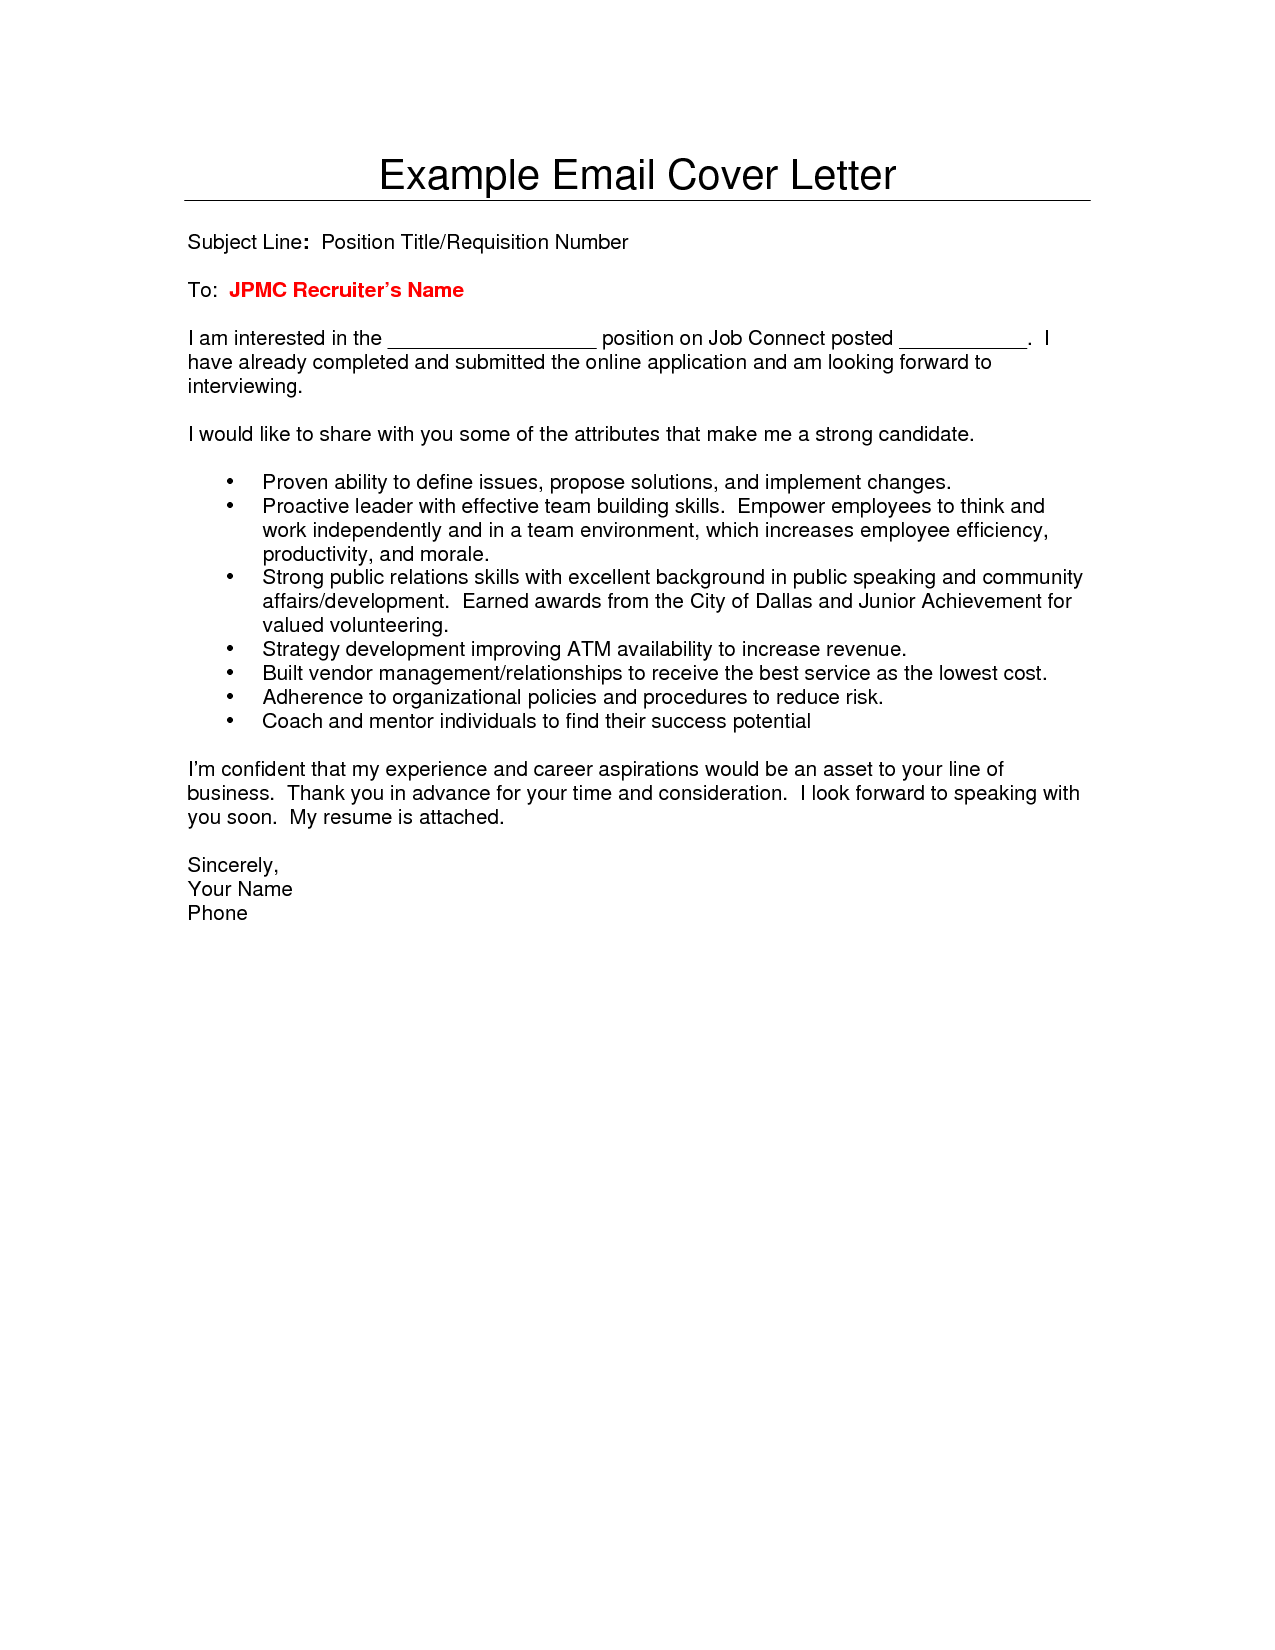 Cover Letter Emails Examples Fresh Email Cover Letter Sample 